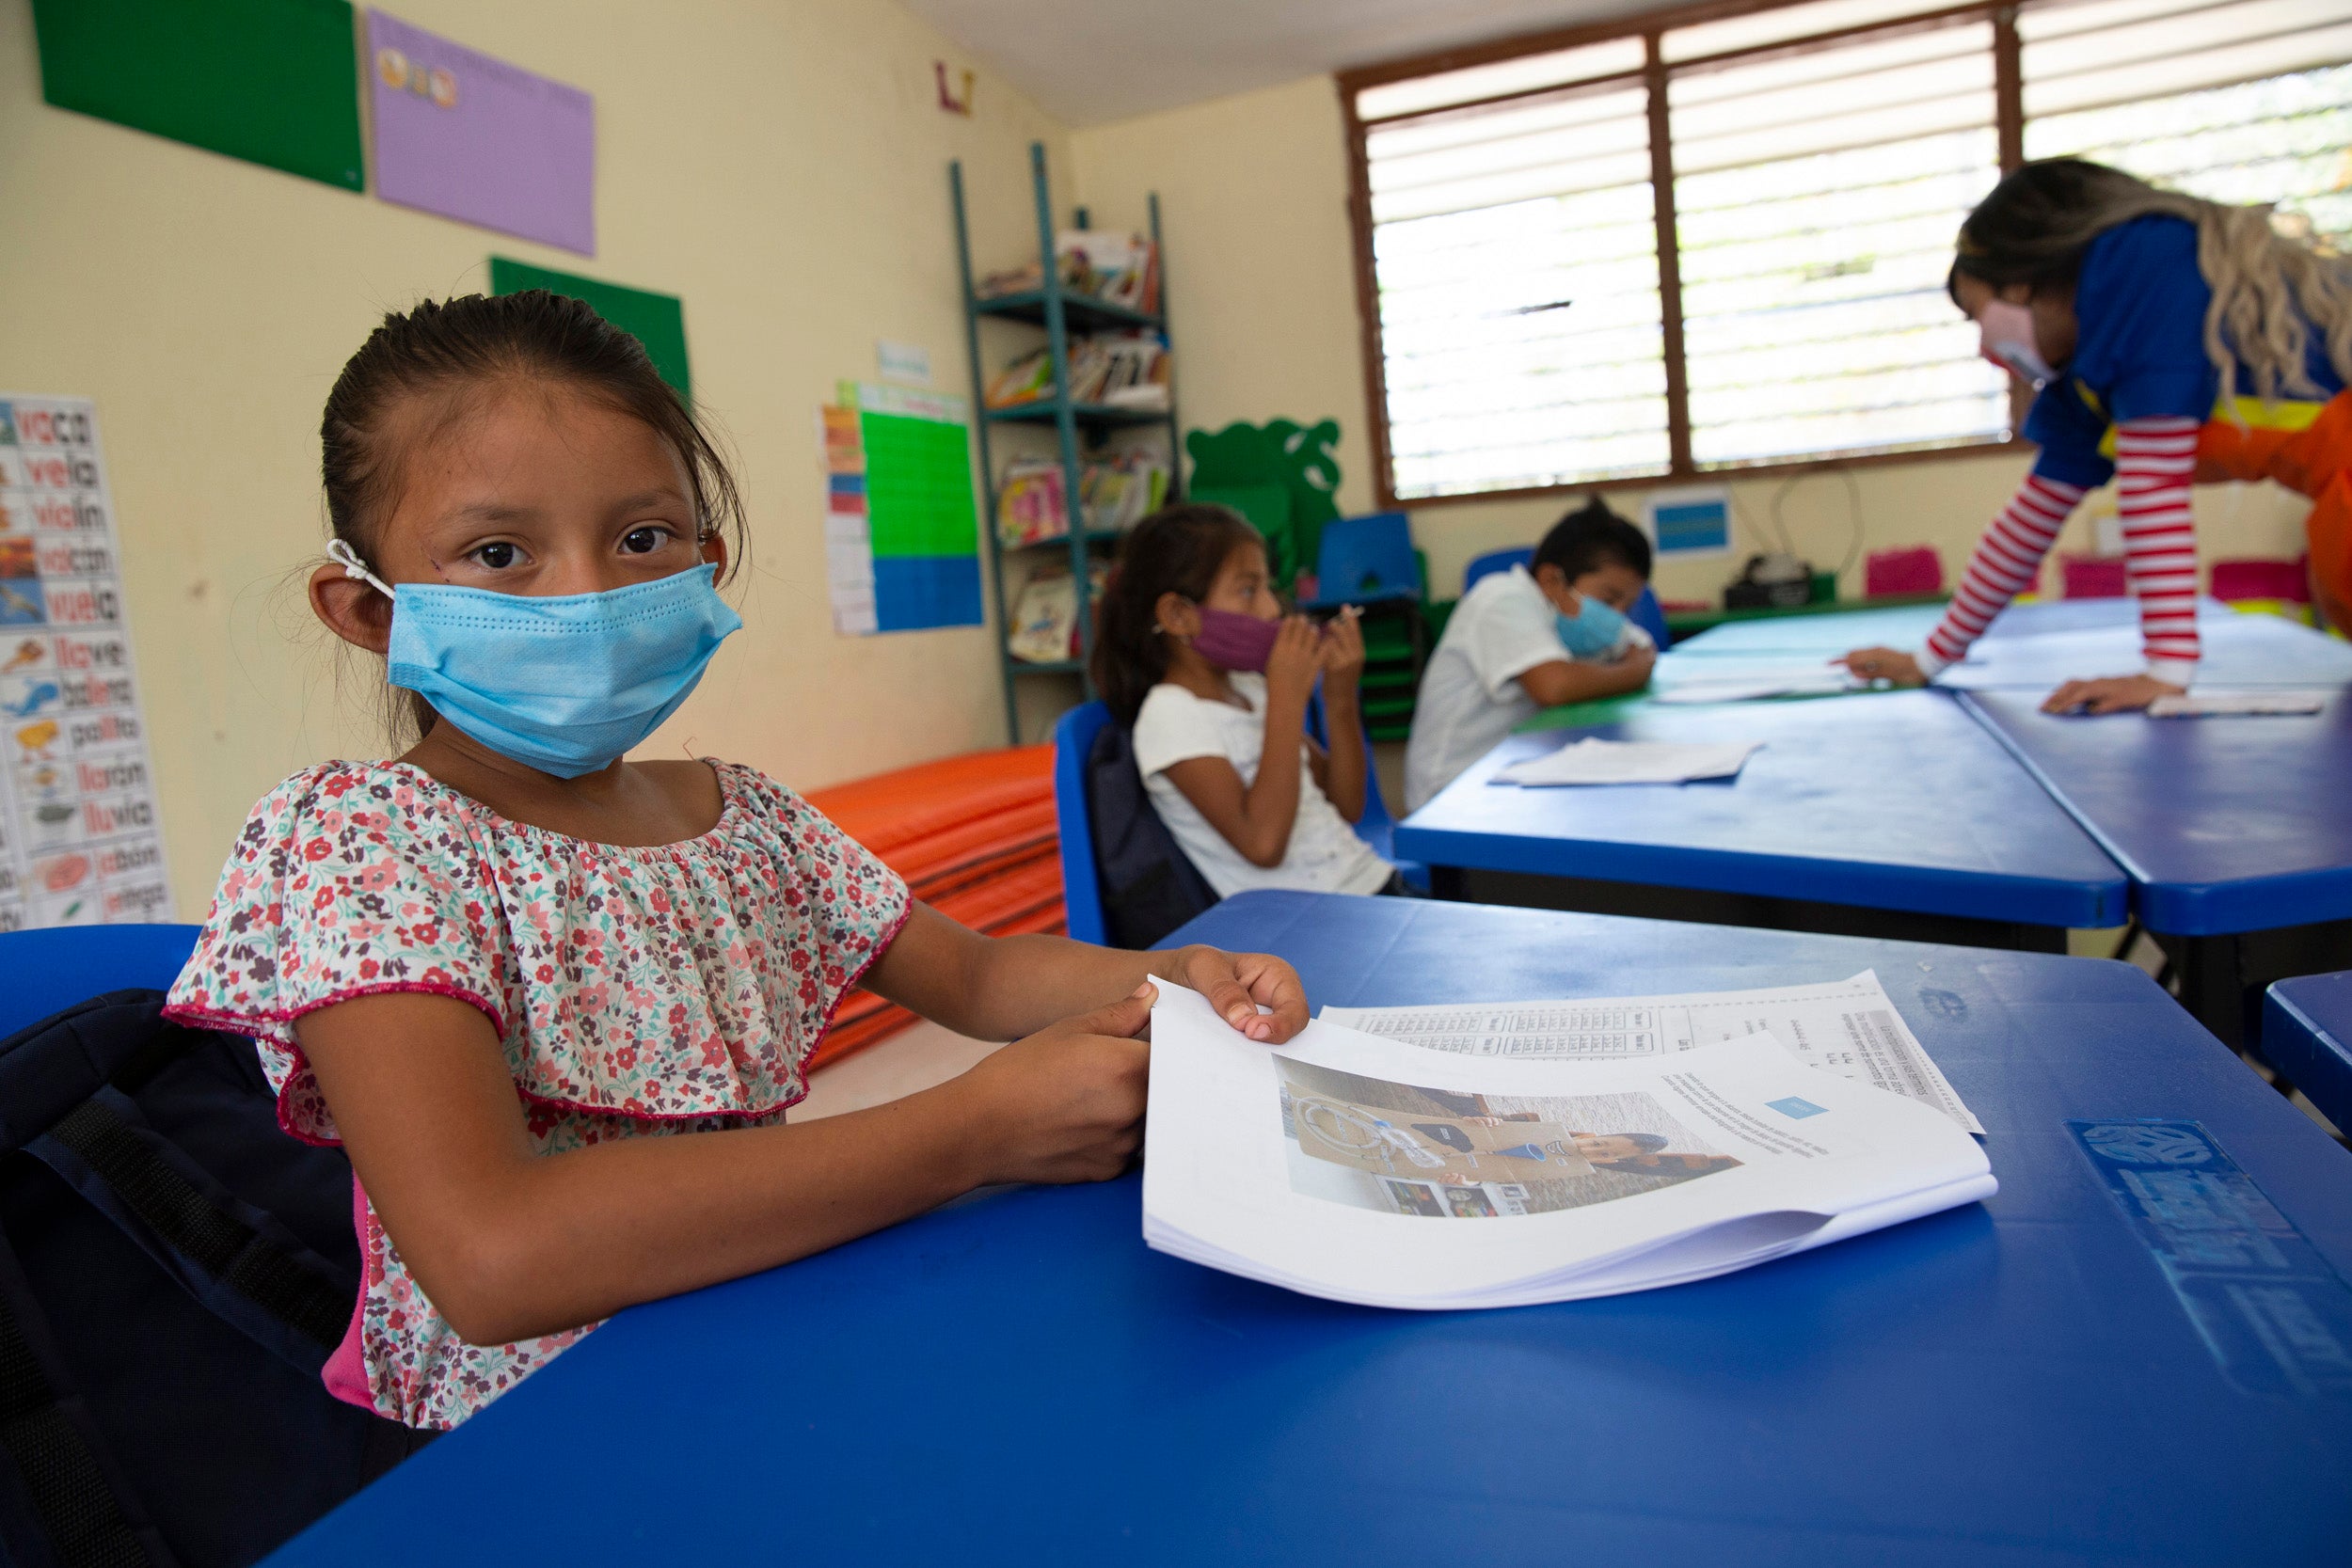 A child wears a face mask in a classroom